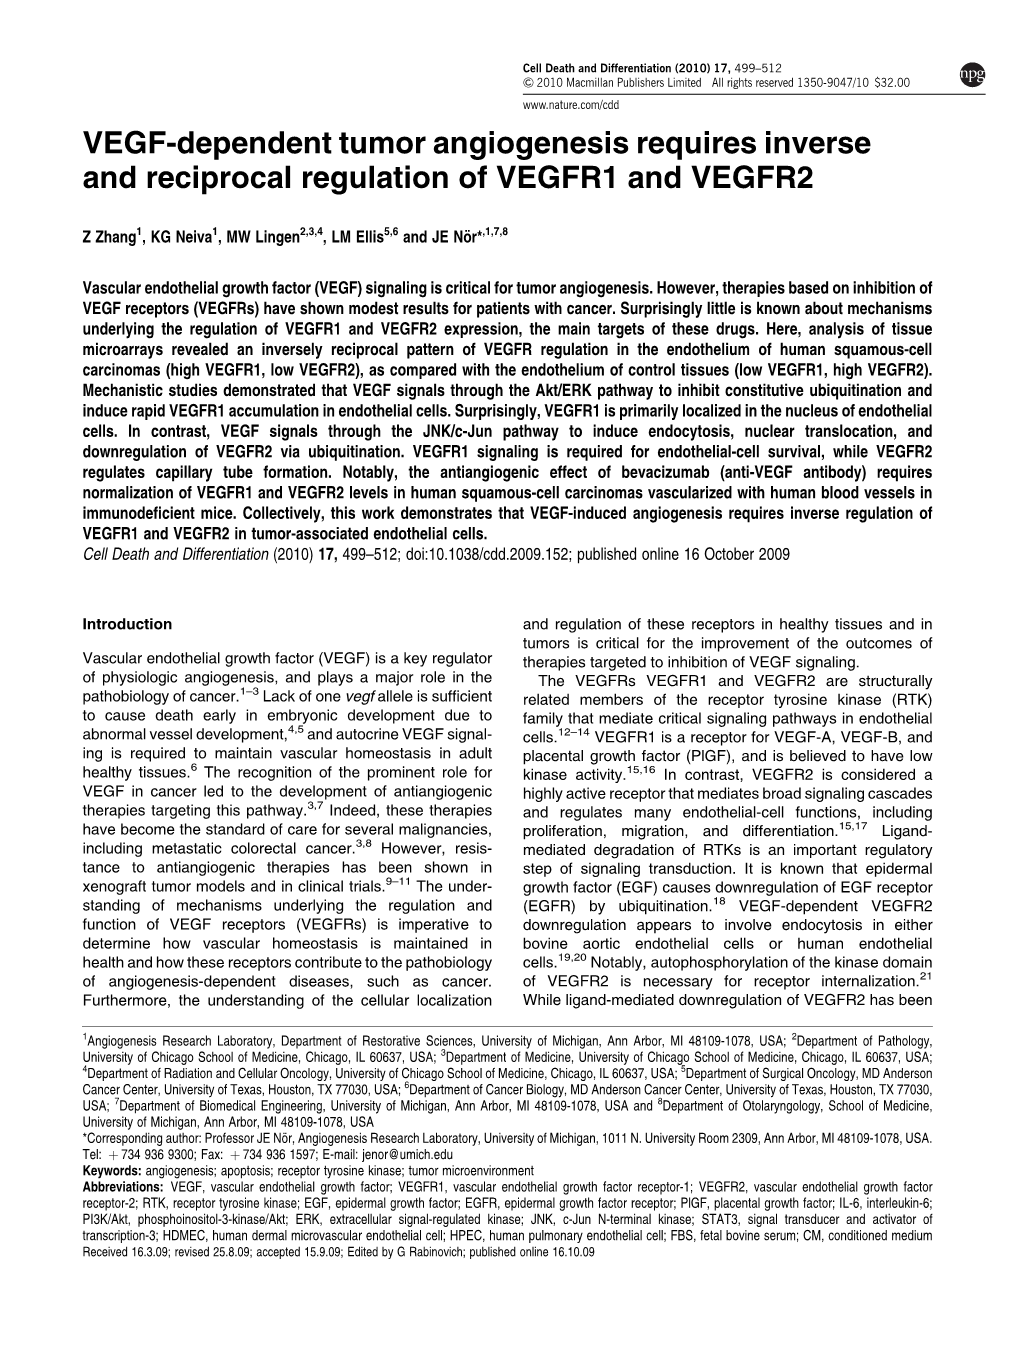 VEGF-Dependent Tumor Angiogenesis Requires Inverse and Reciprocal Regulation of VEGFR1 and VEGFR2